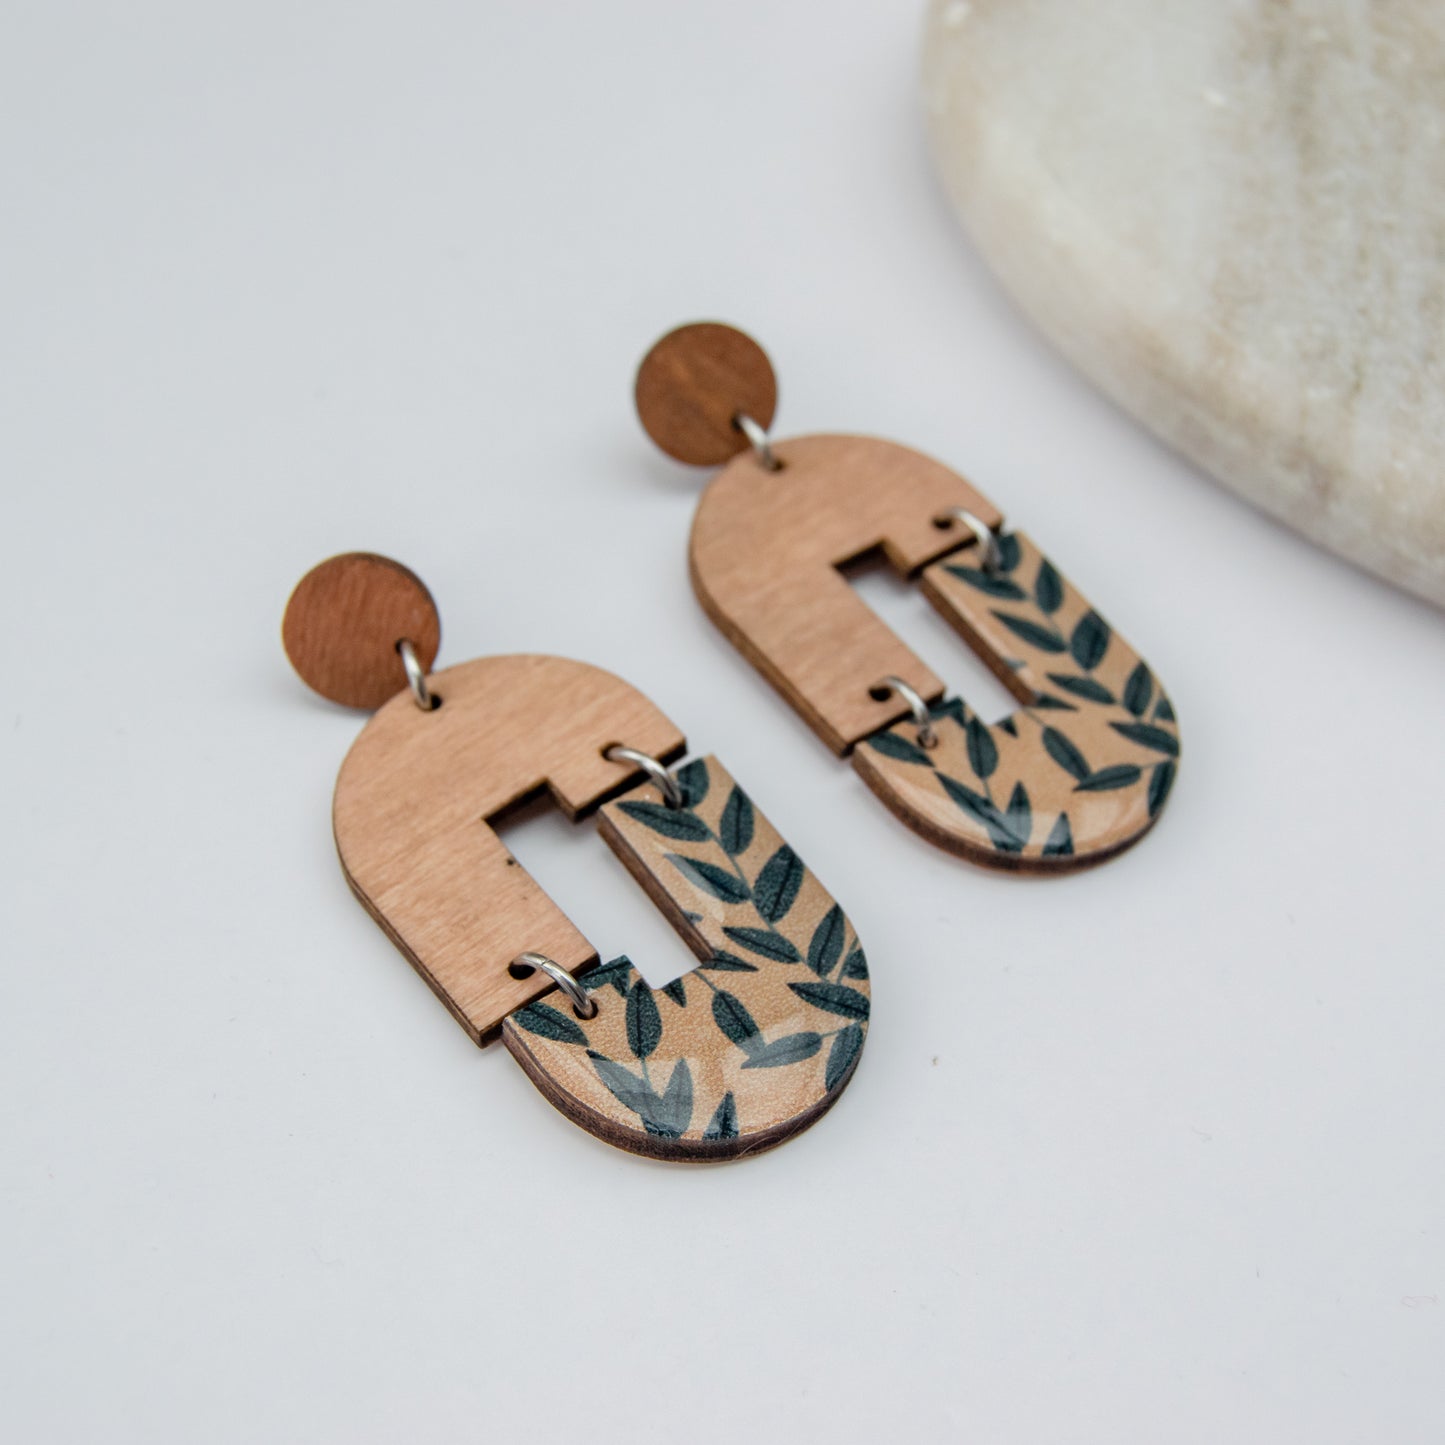 Elise - Wooden statement earrings in natural colors with green leaves